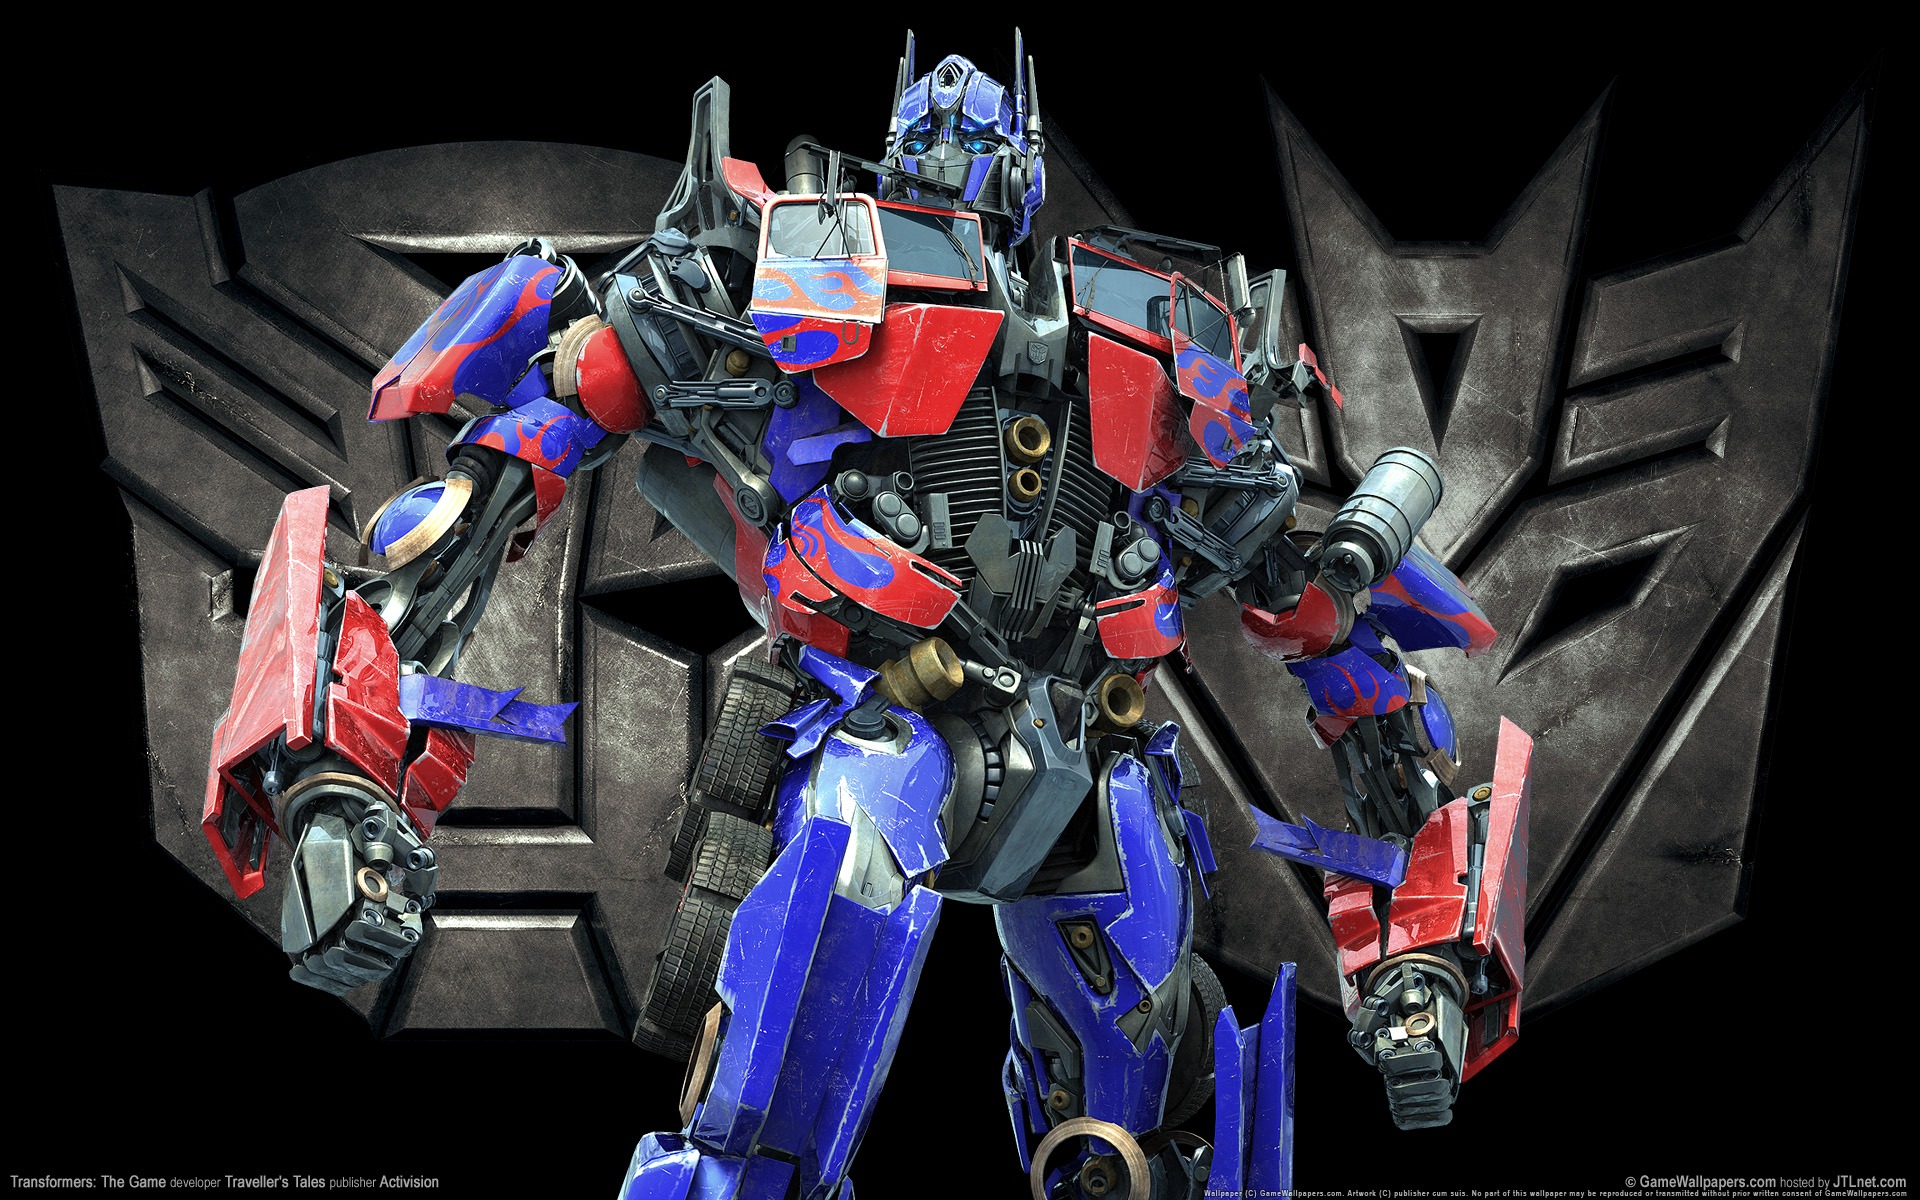 Transformers: The Dark Of The Moon HD wallpapers #3 - 1920x1200